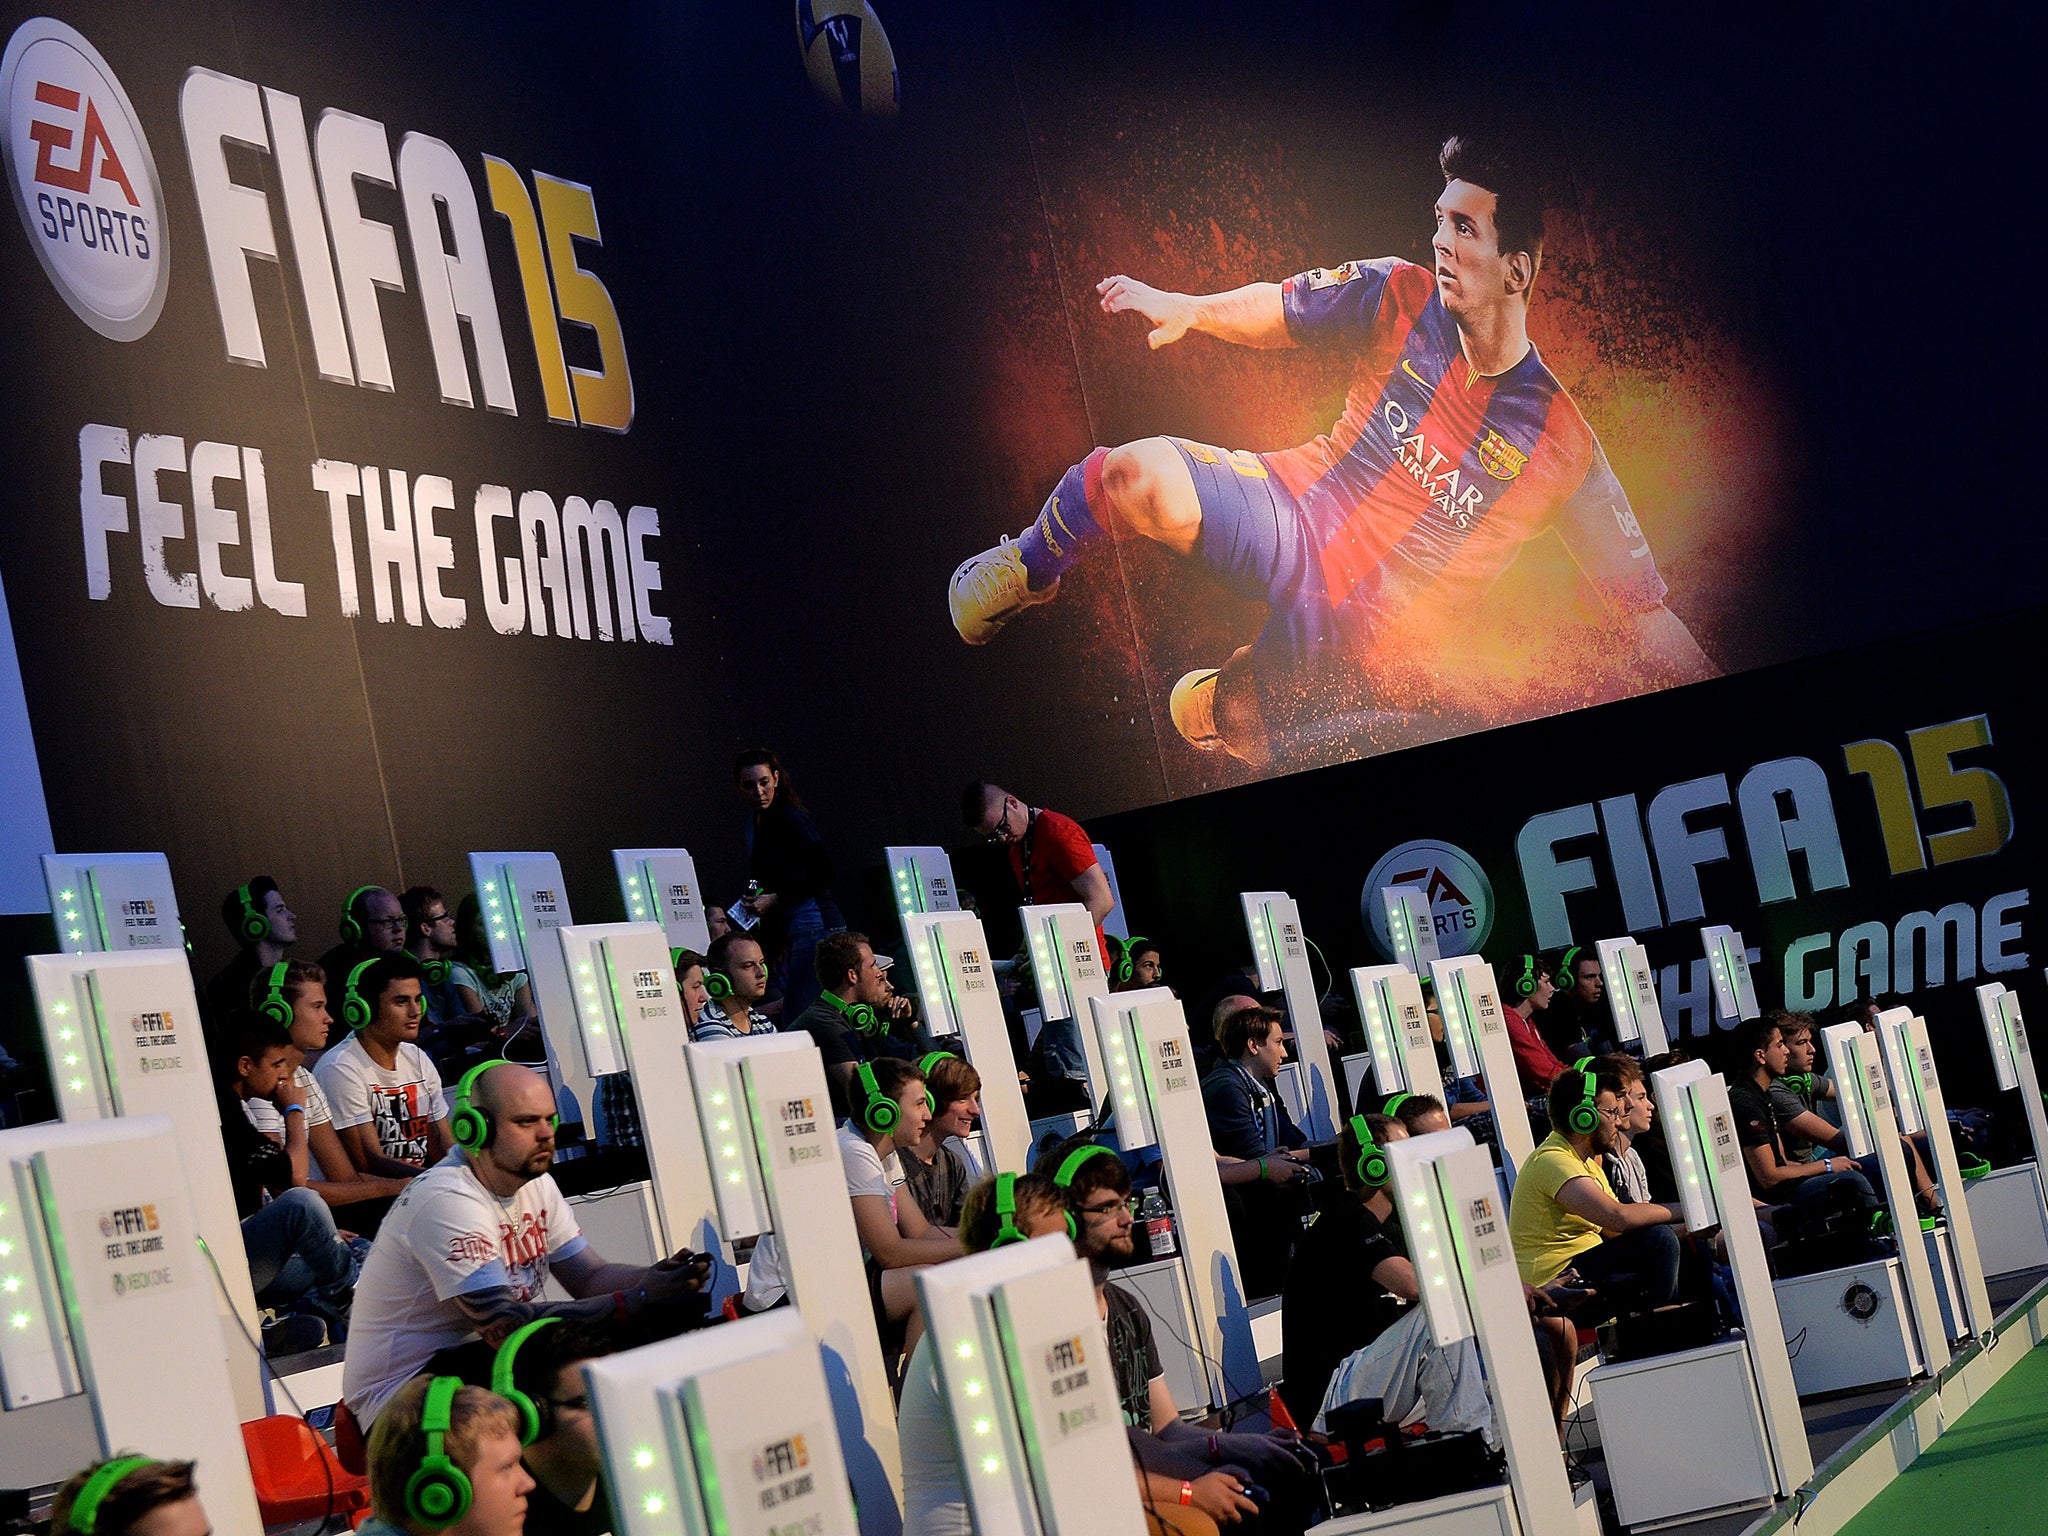 Visitors try out the game 'FIFA 15' at the EA Sports stand at the 2014 Gamescom gaming trade fair on August 14, 2014 in Cologne, Germany